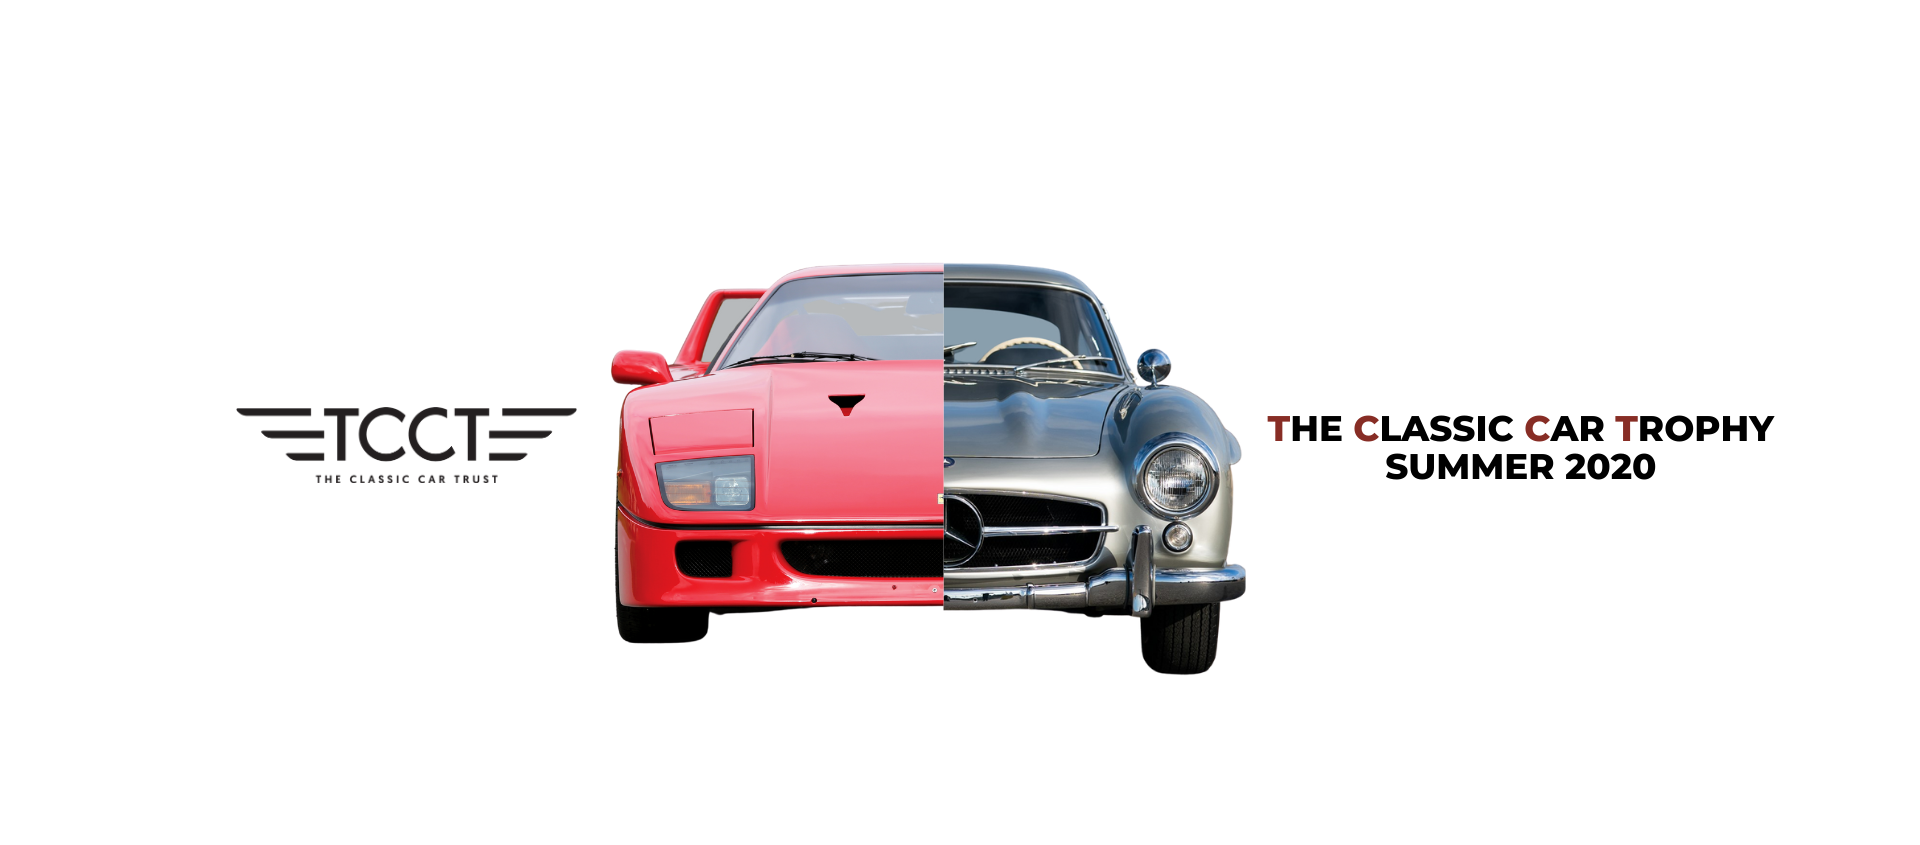 300SL - F40: choose your Queen image